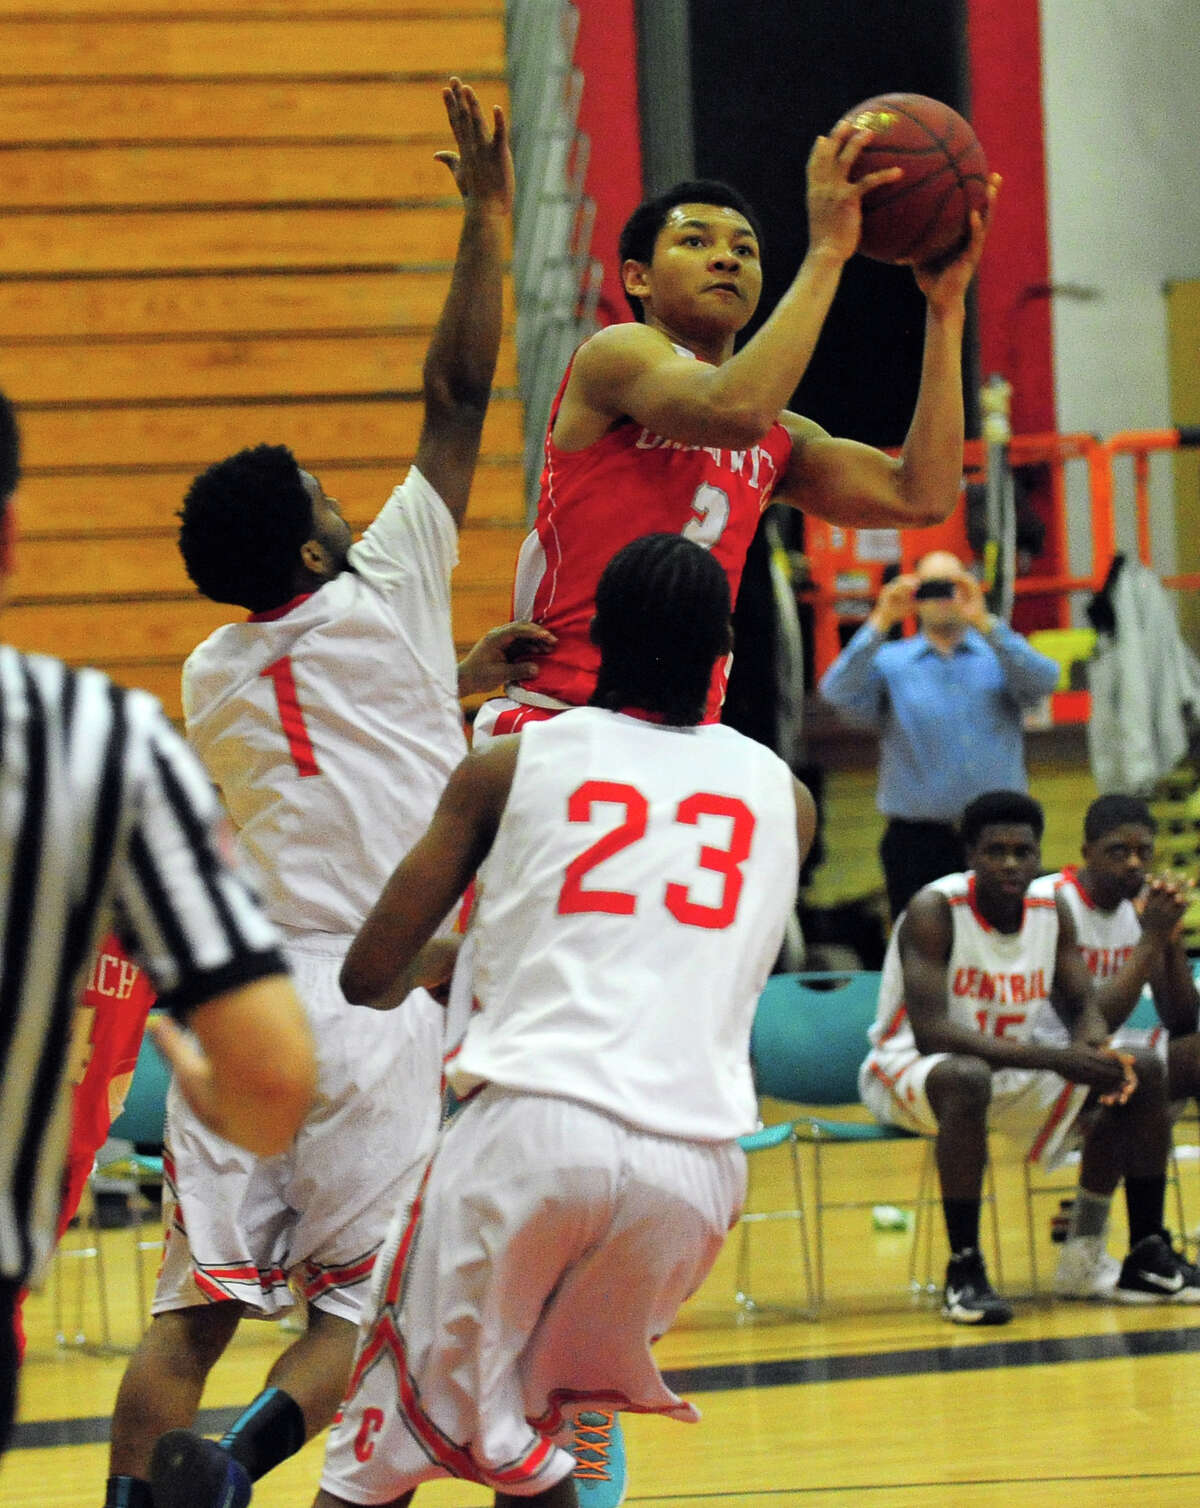 Boys basketball action between Greenwich and Central in Bridgeport, Conn. on Tuesday February 11, 2014.